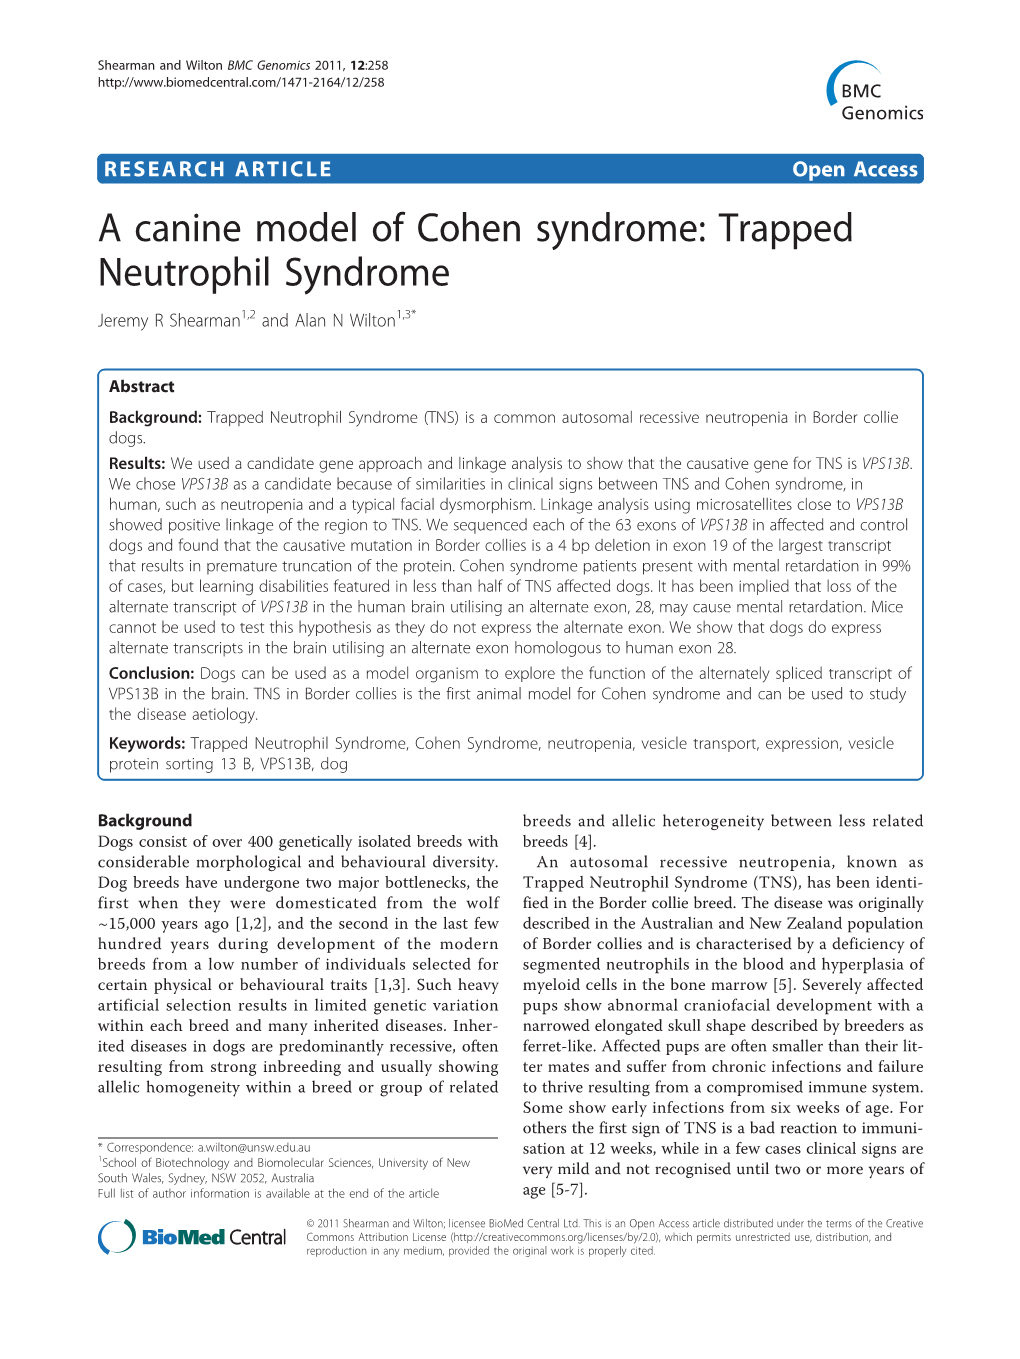 A Canine Model of Cohen Syndrome: Trapped Neutrophil Syndrome Jeremy R Shearman1,2 and Alan N Wilton1,3*